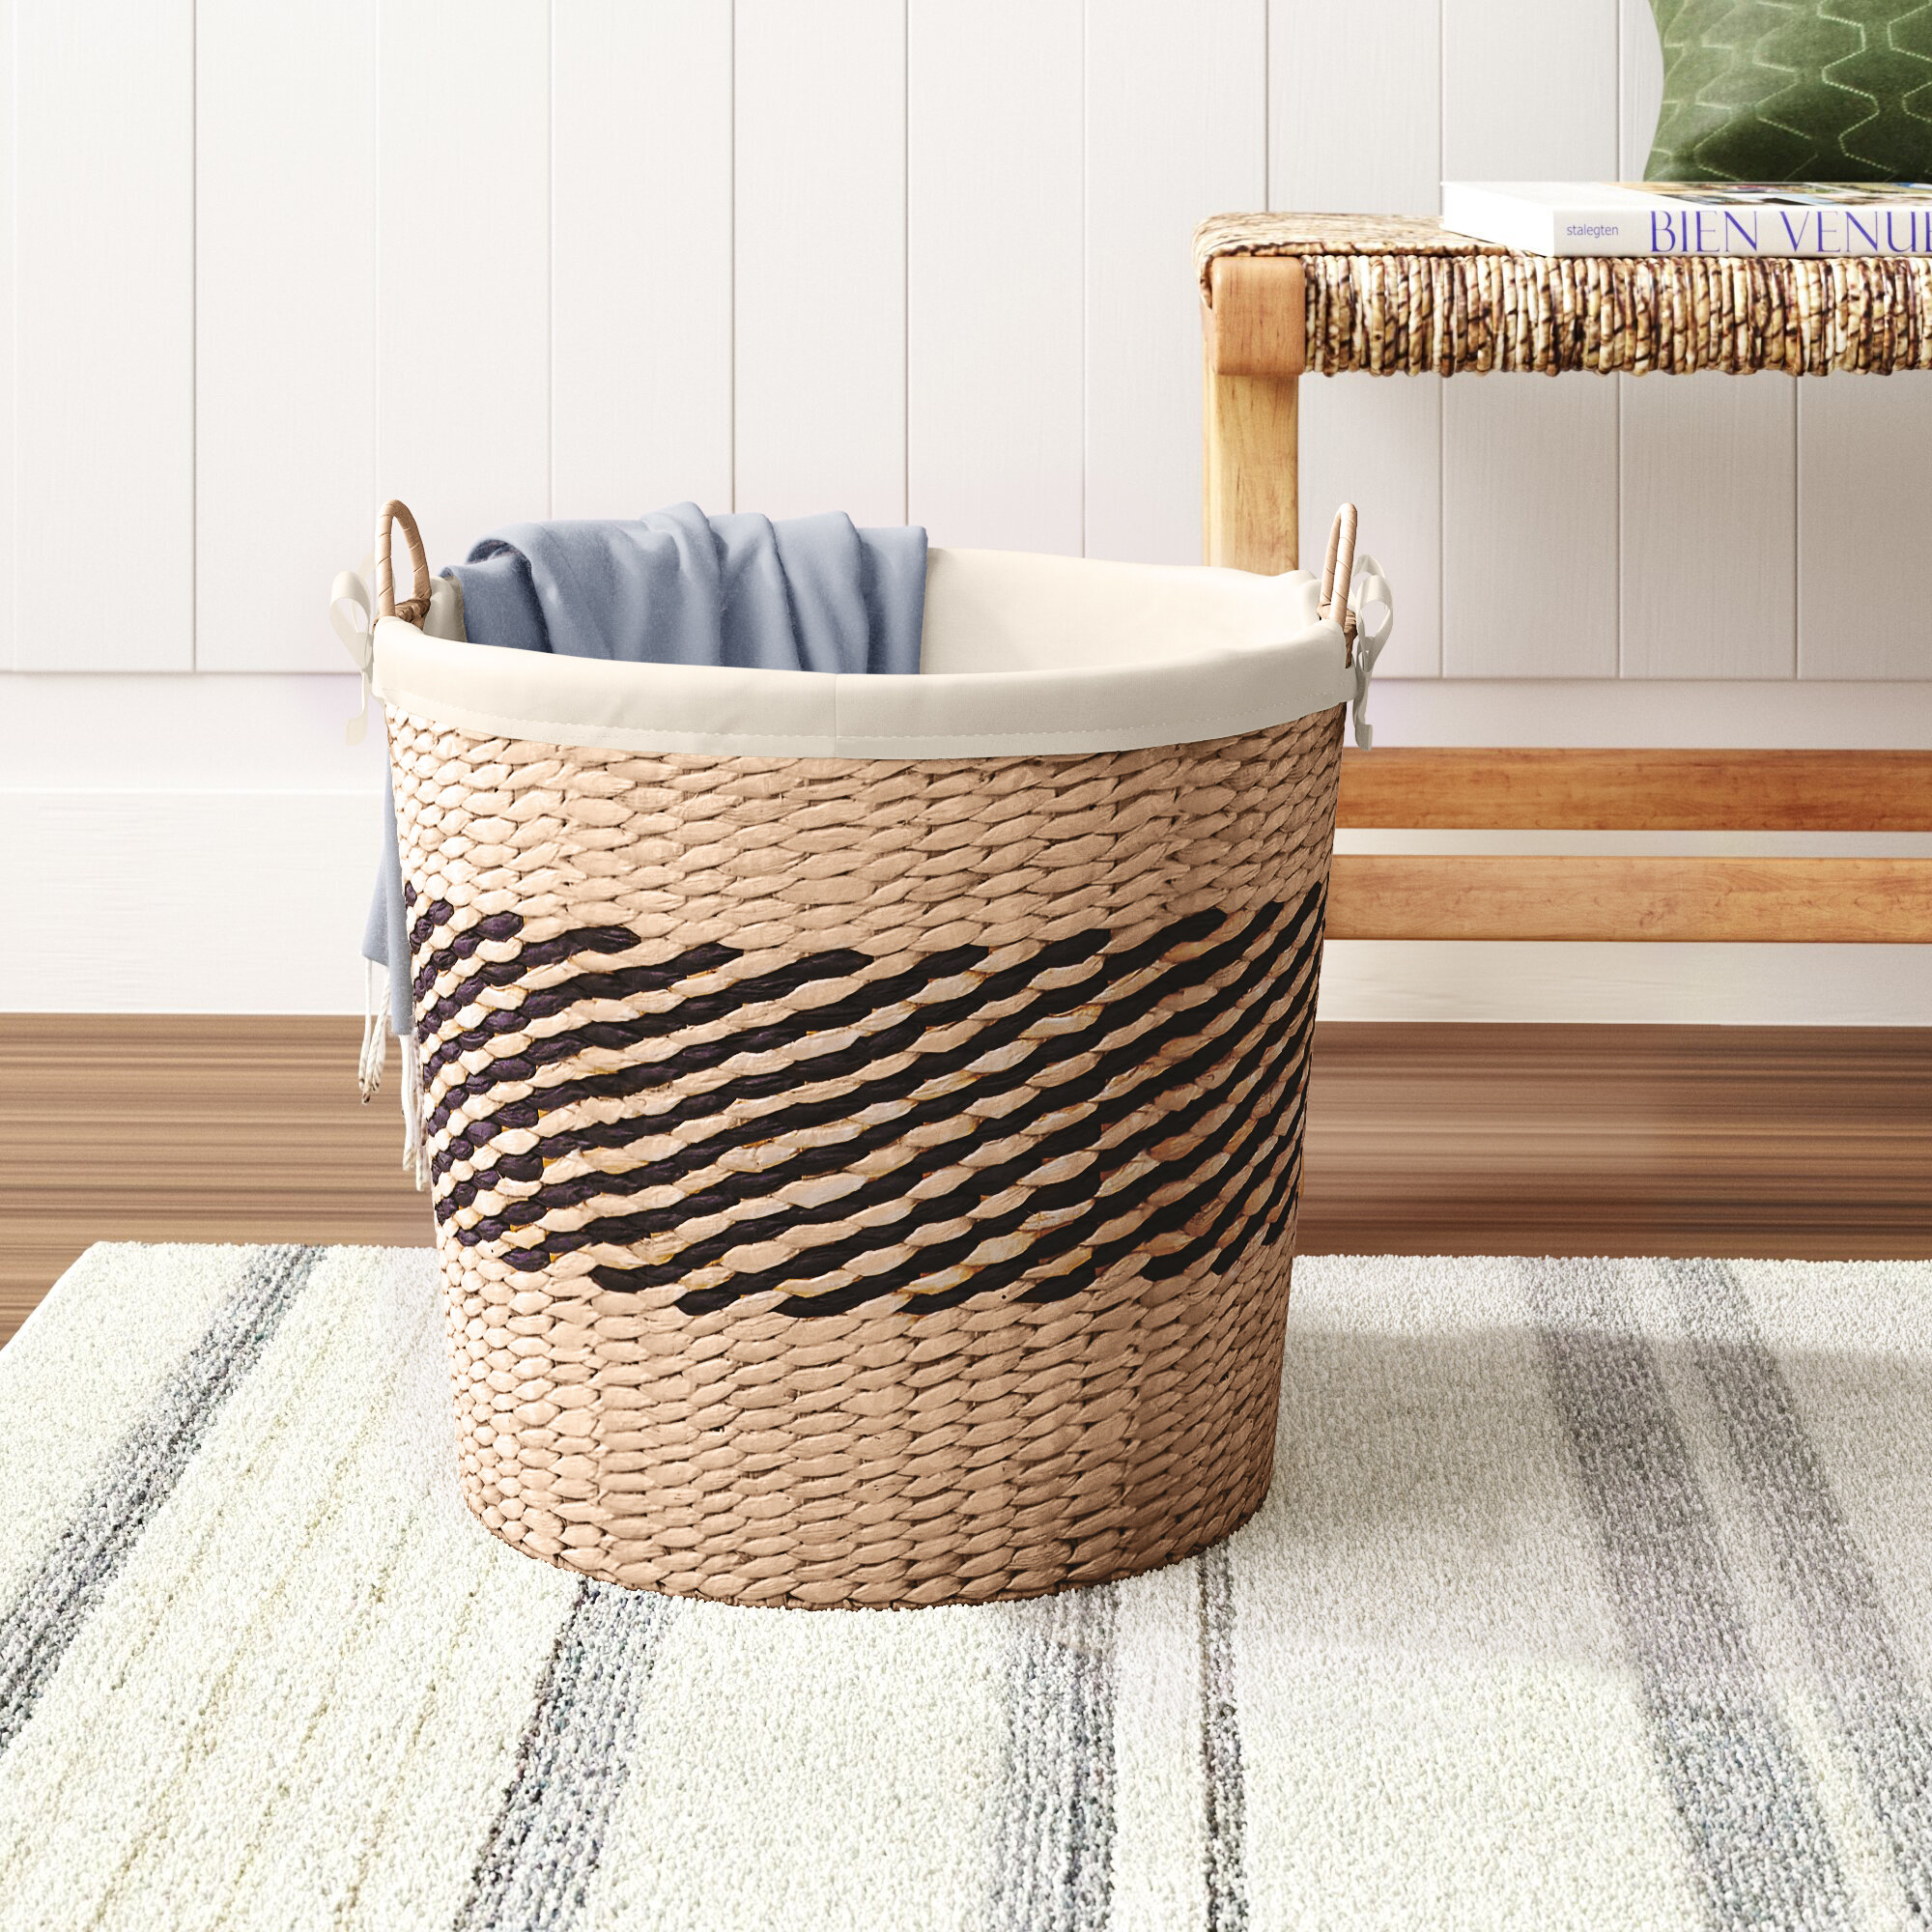 Set of 3 Blue and Brown Striped Lined Nesting Baskets Bathroom Trio Organizers 